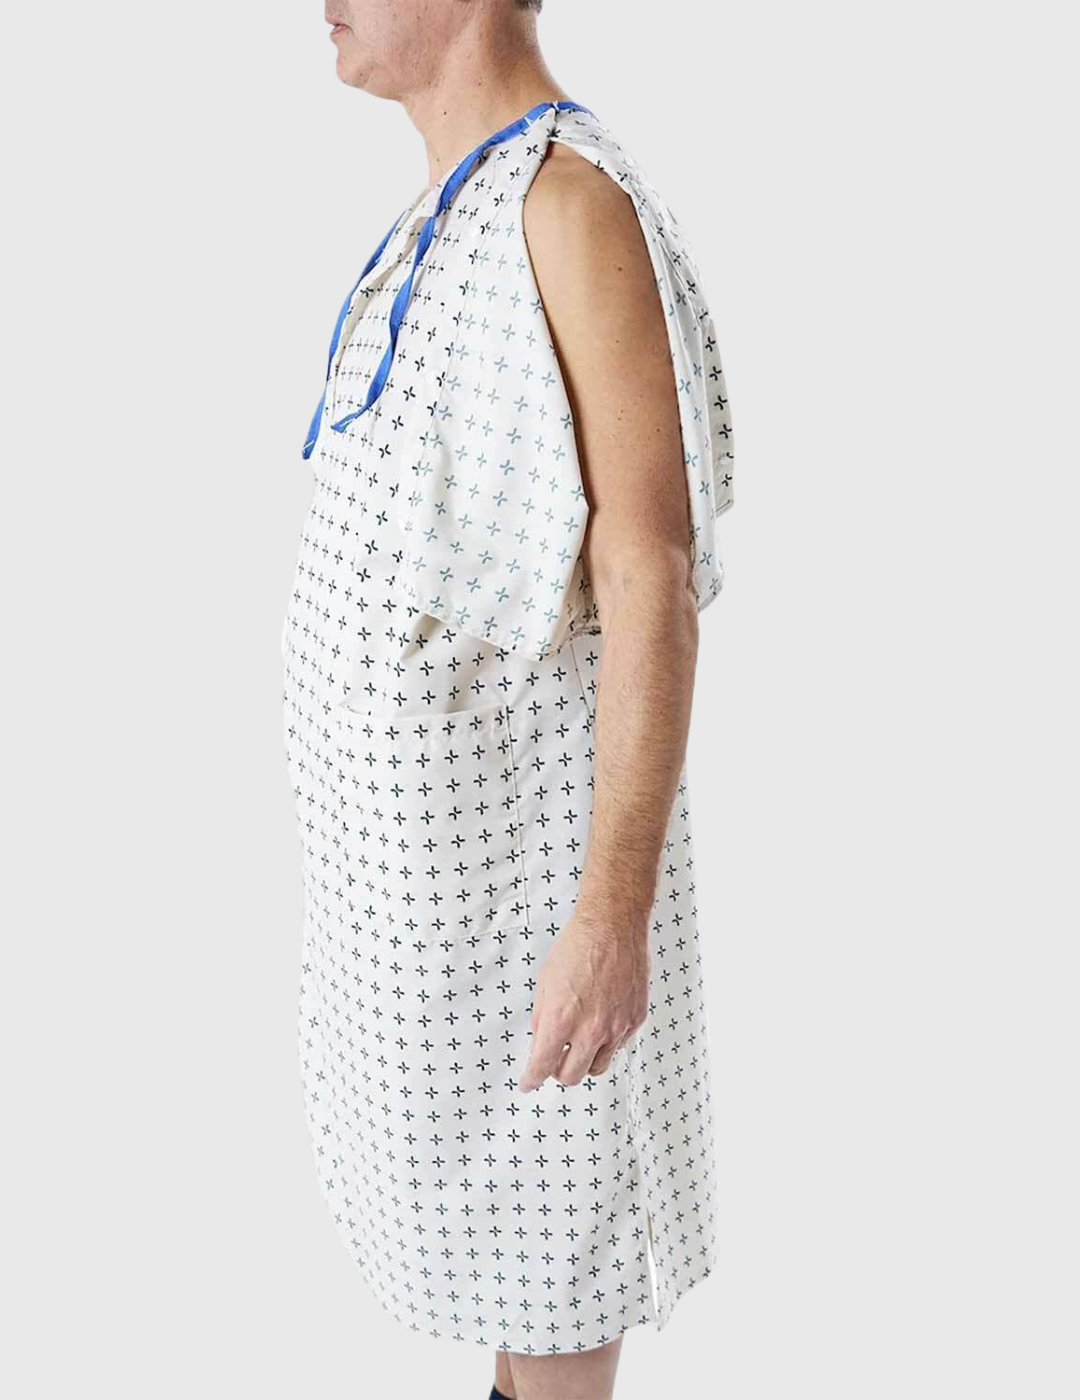 Hospital Patient Gown by Care+Wear x Parsons